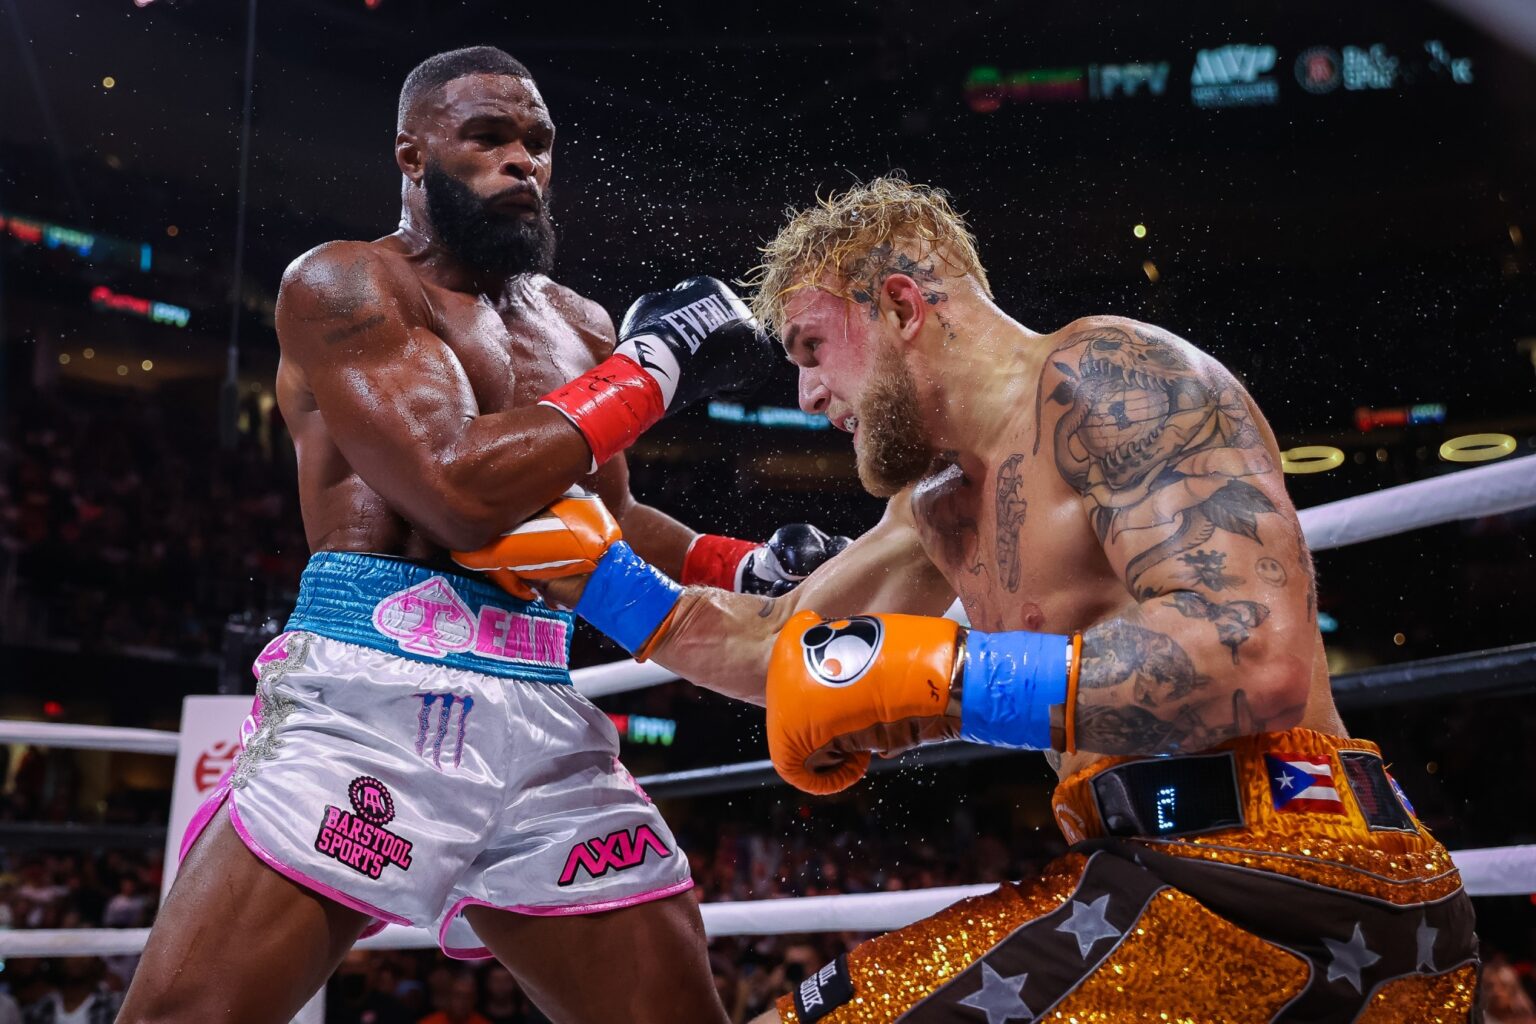 Jake Paul has officially won his fourth consecutive fight, this time against Tyron Woodley. But are all Jake Paul fights rigged?